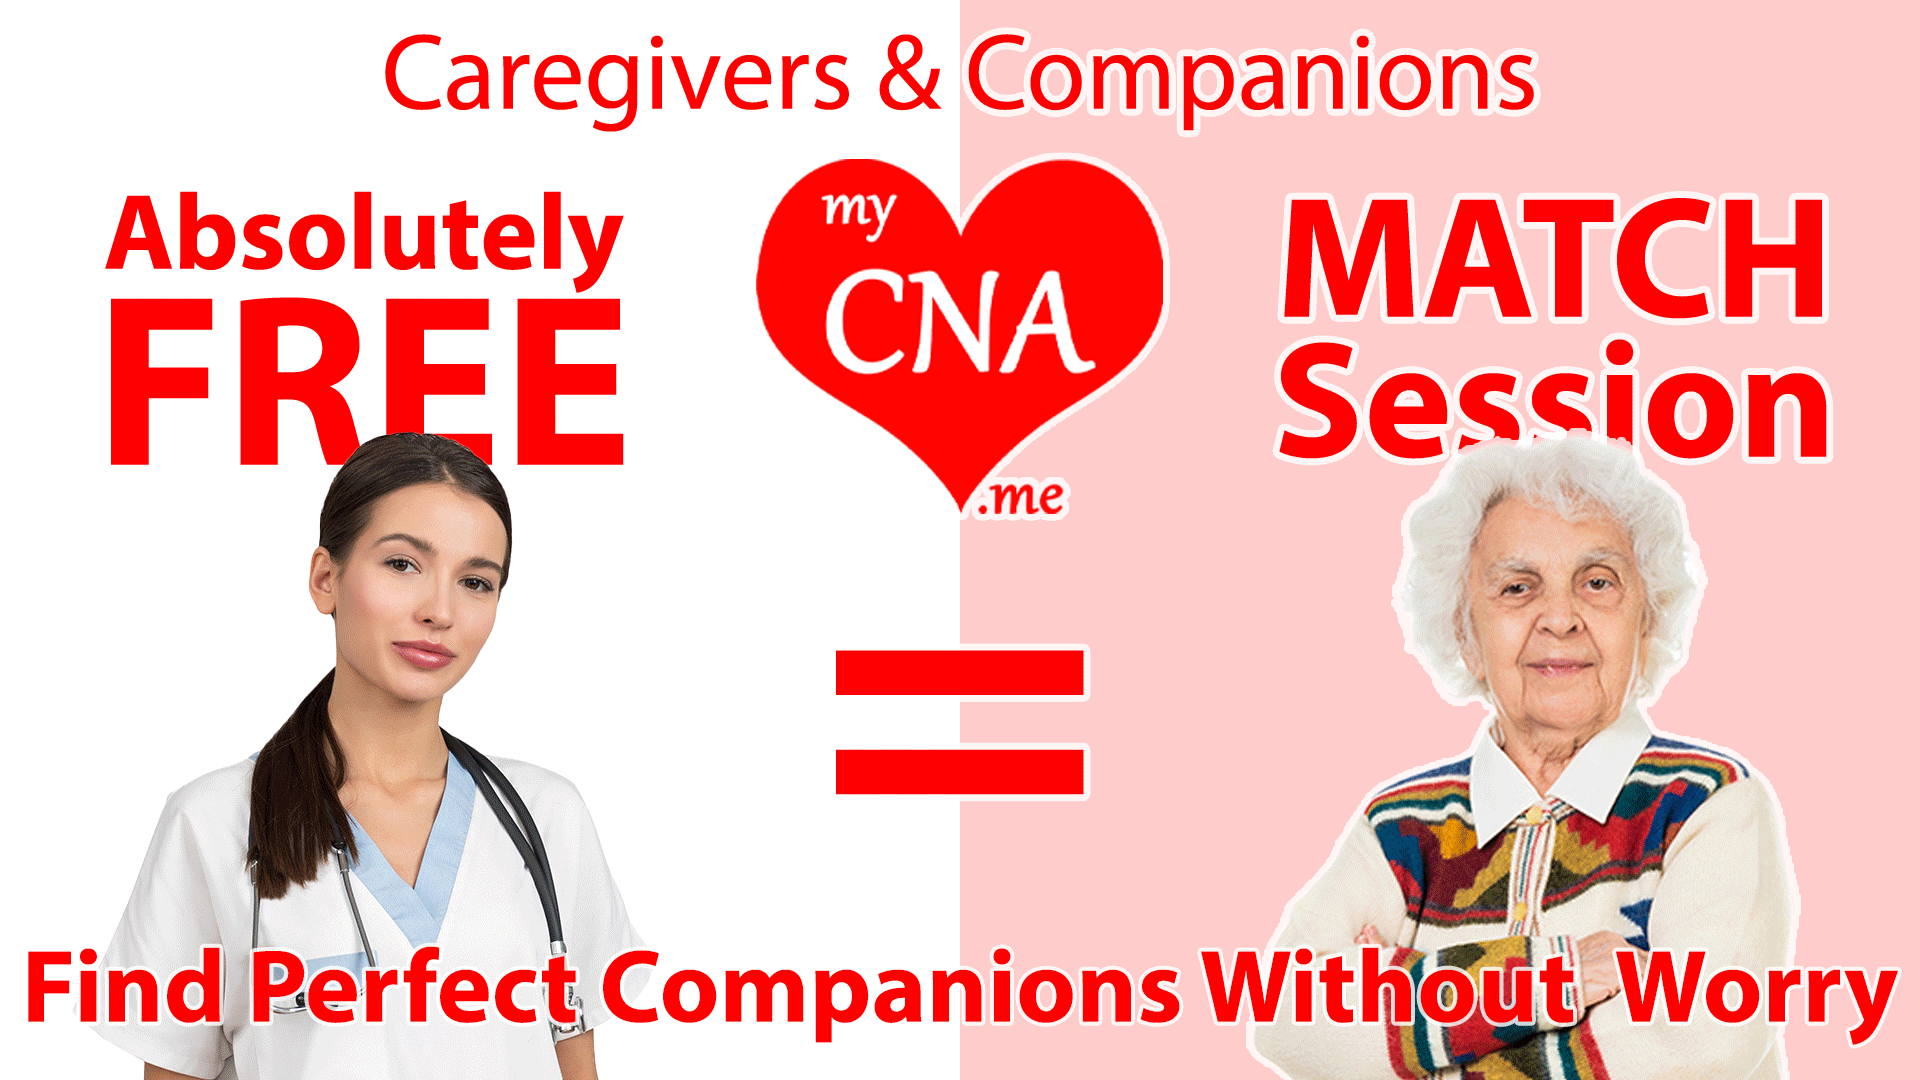 Caregivers-and-companions-services-free caregiver match-session-houston-texas-1